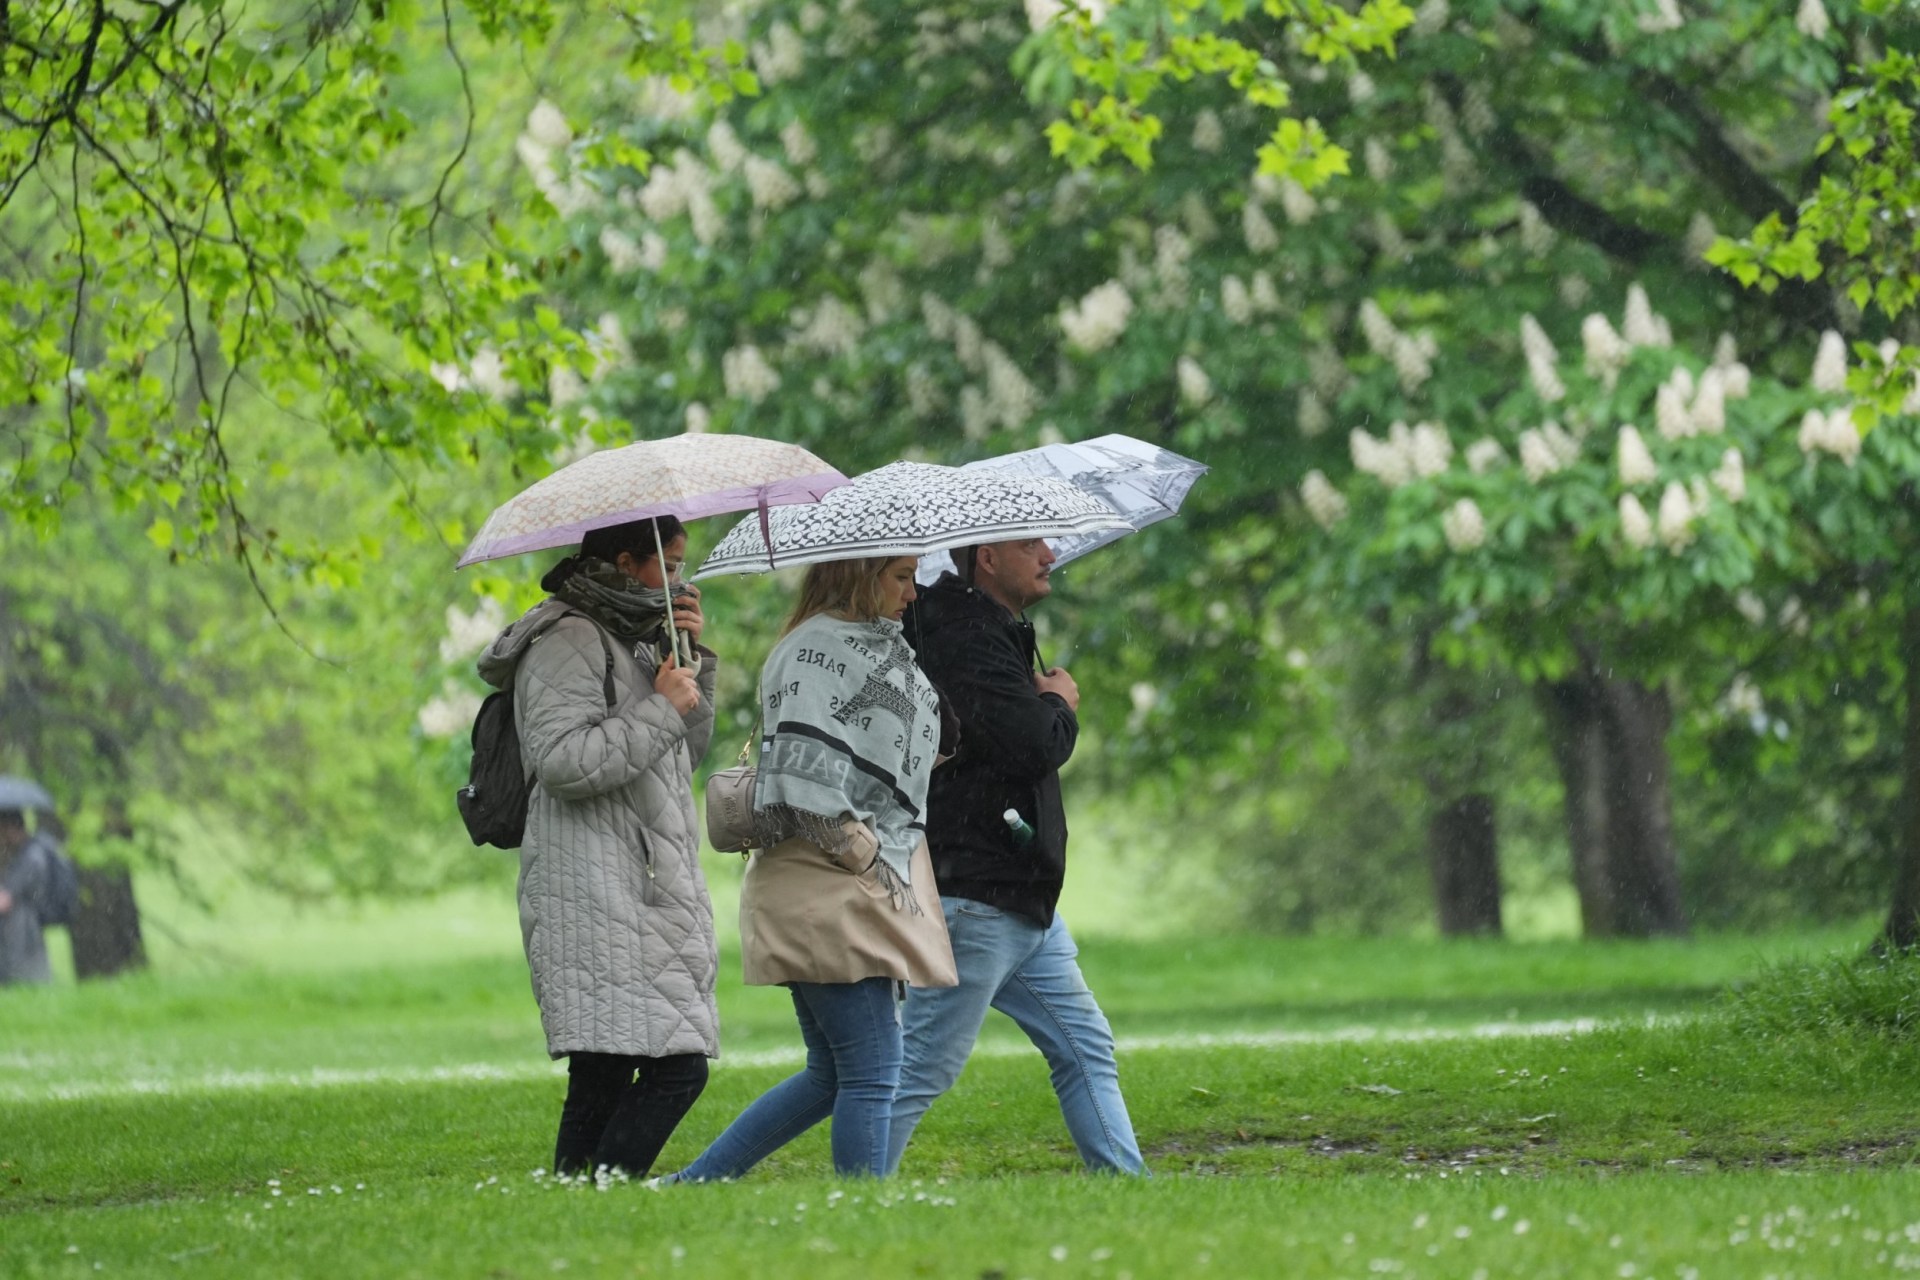 warm weather is finally here (but get set for a washout summer)